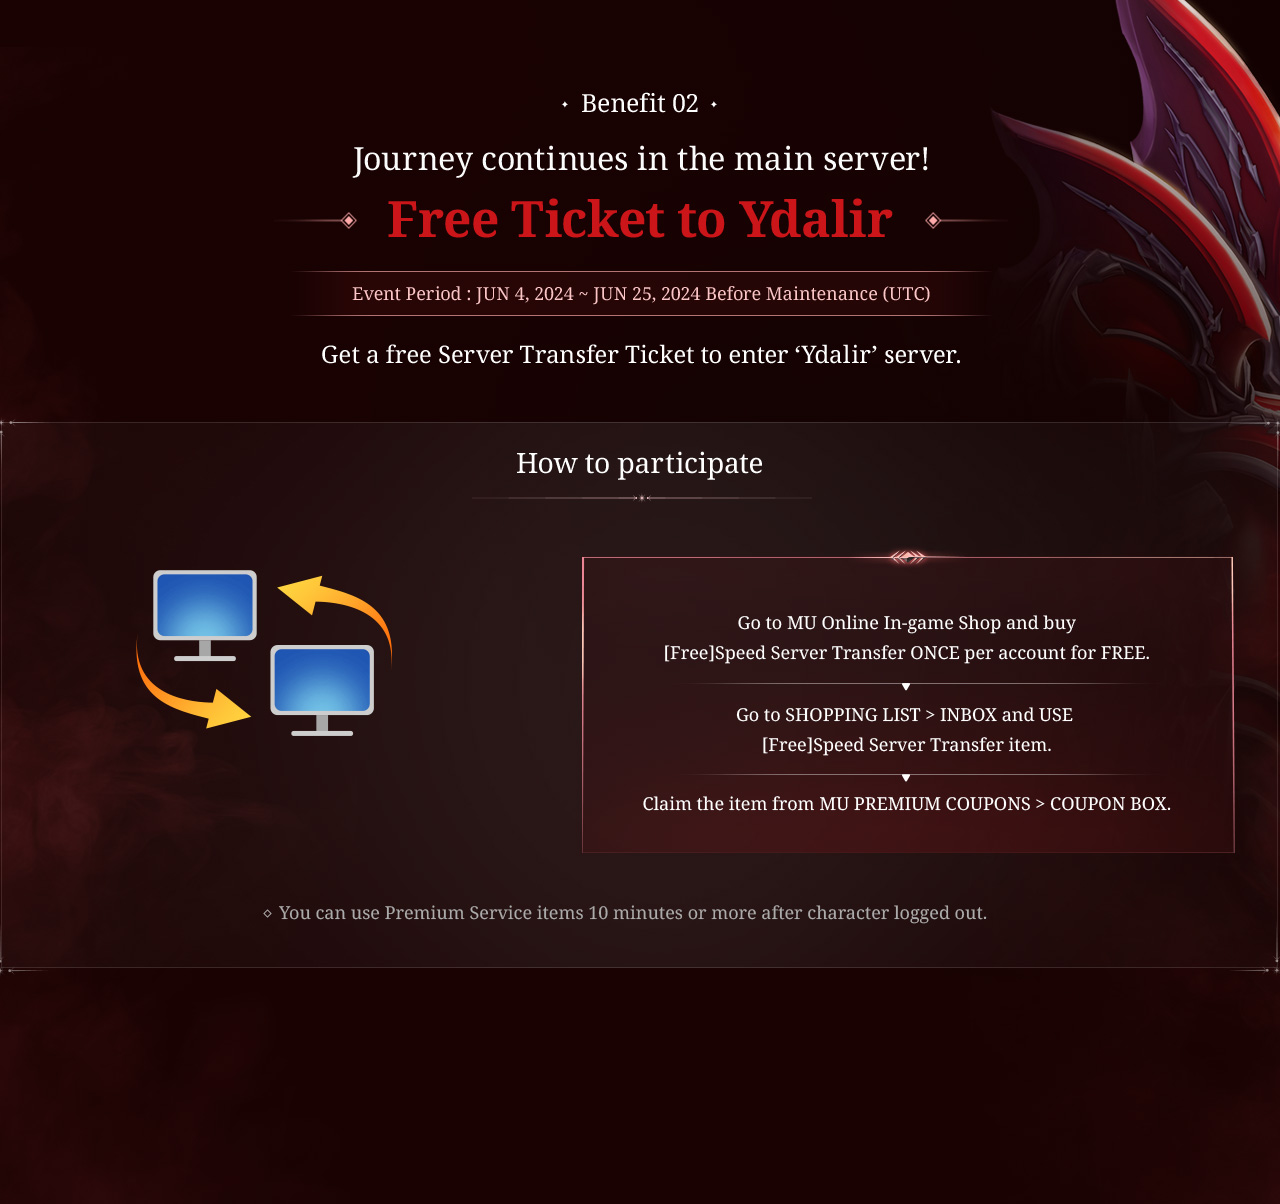 Benefit02 Journey continues in the main server! Free Ticket to Ydalir